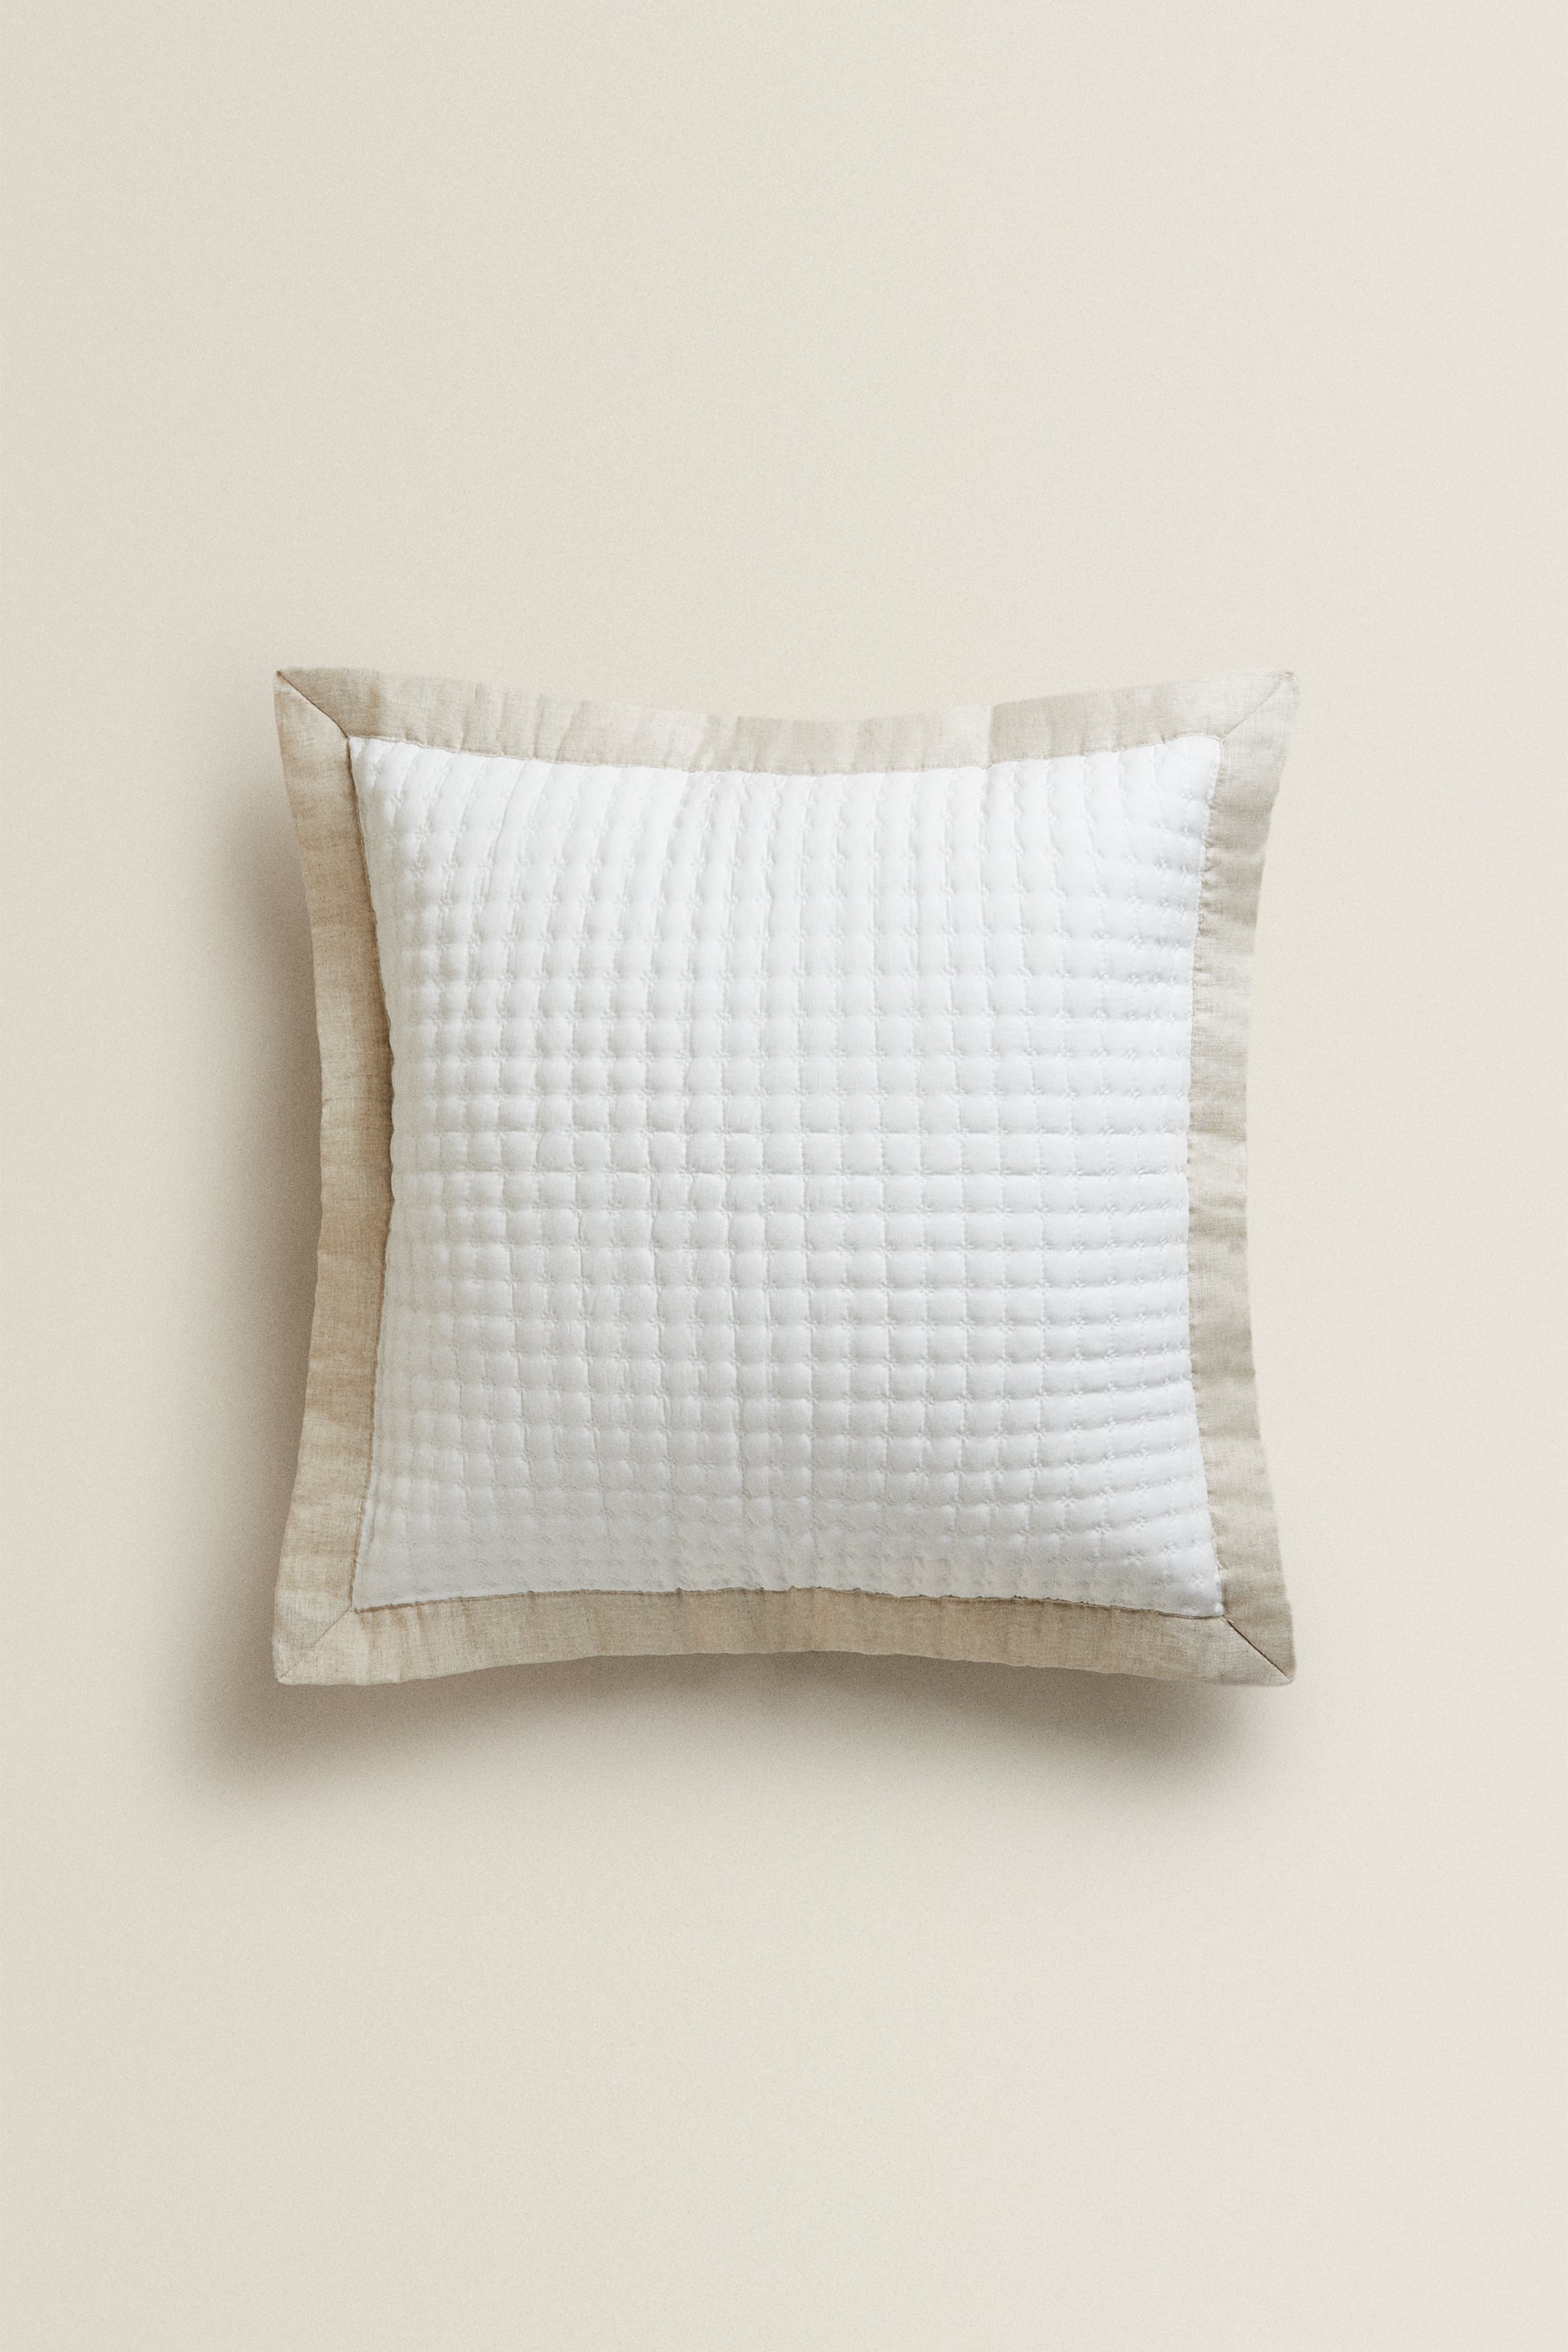 TEXTURED THROW PILLOW COVER WITH LINEN BORDER